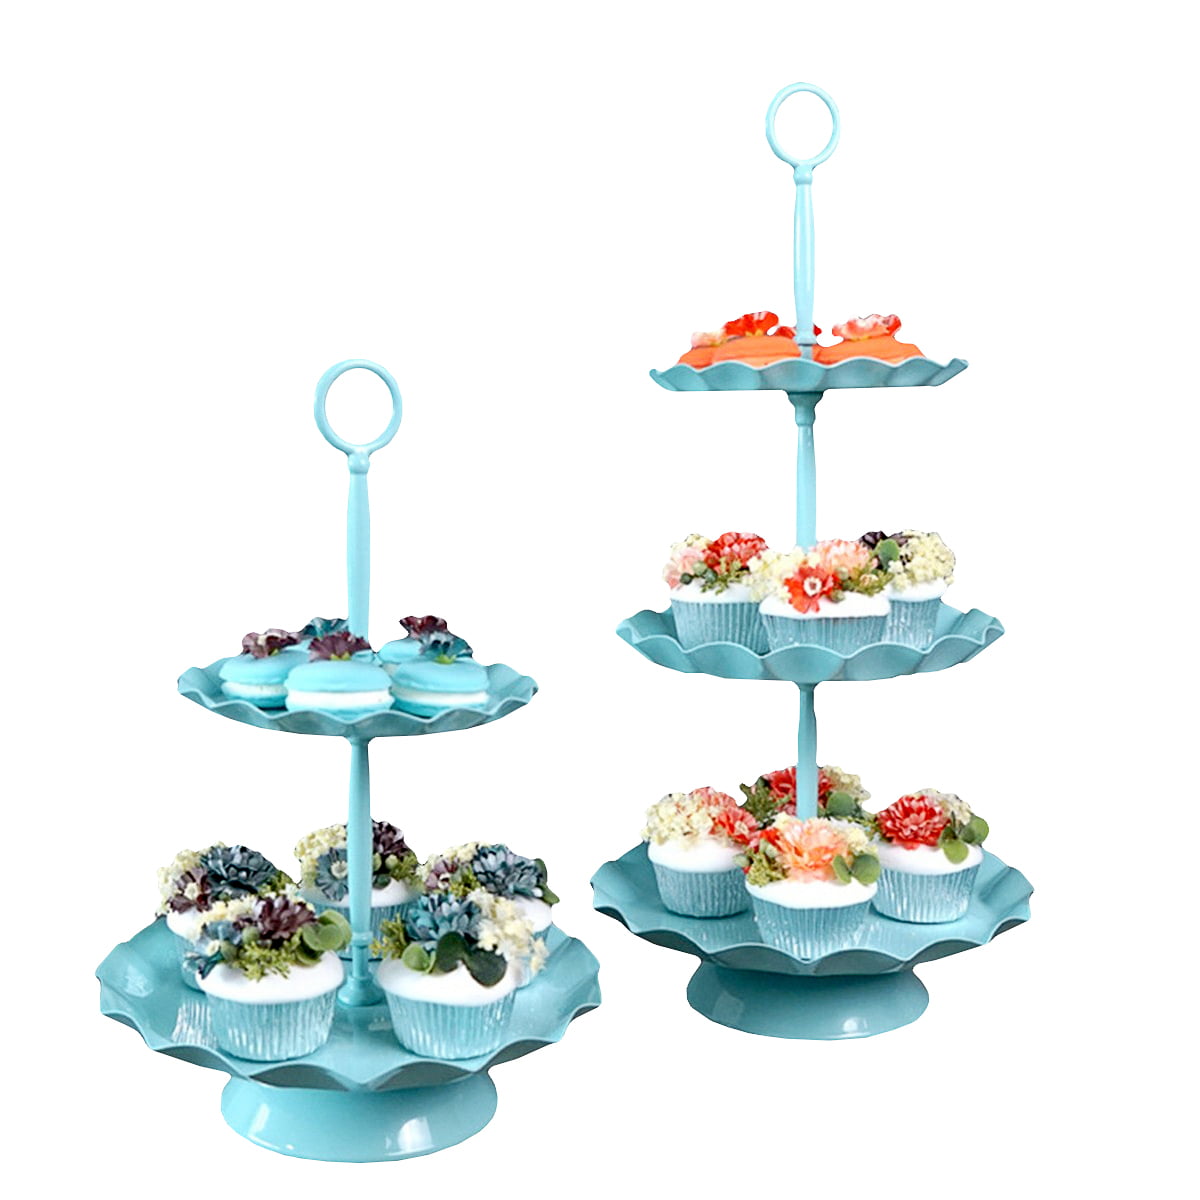 x1 Set blue round head for 3 tier stands with fixings Cake stand fittings New